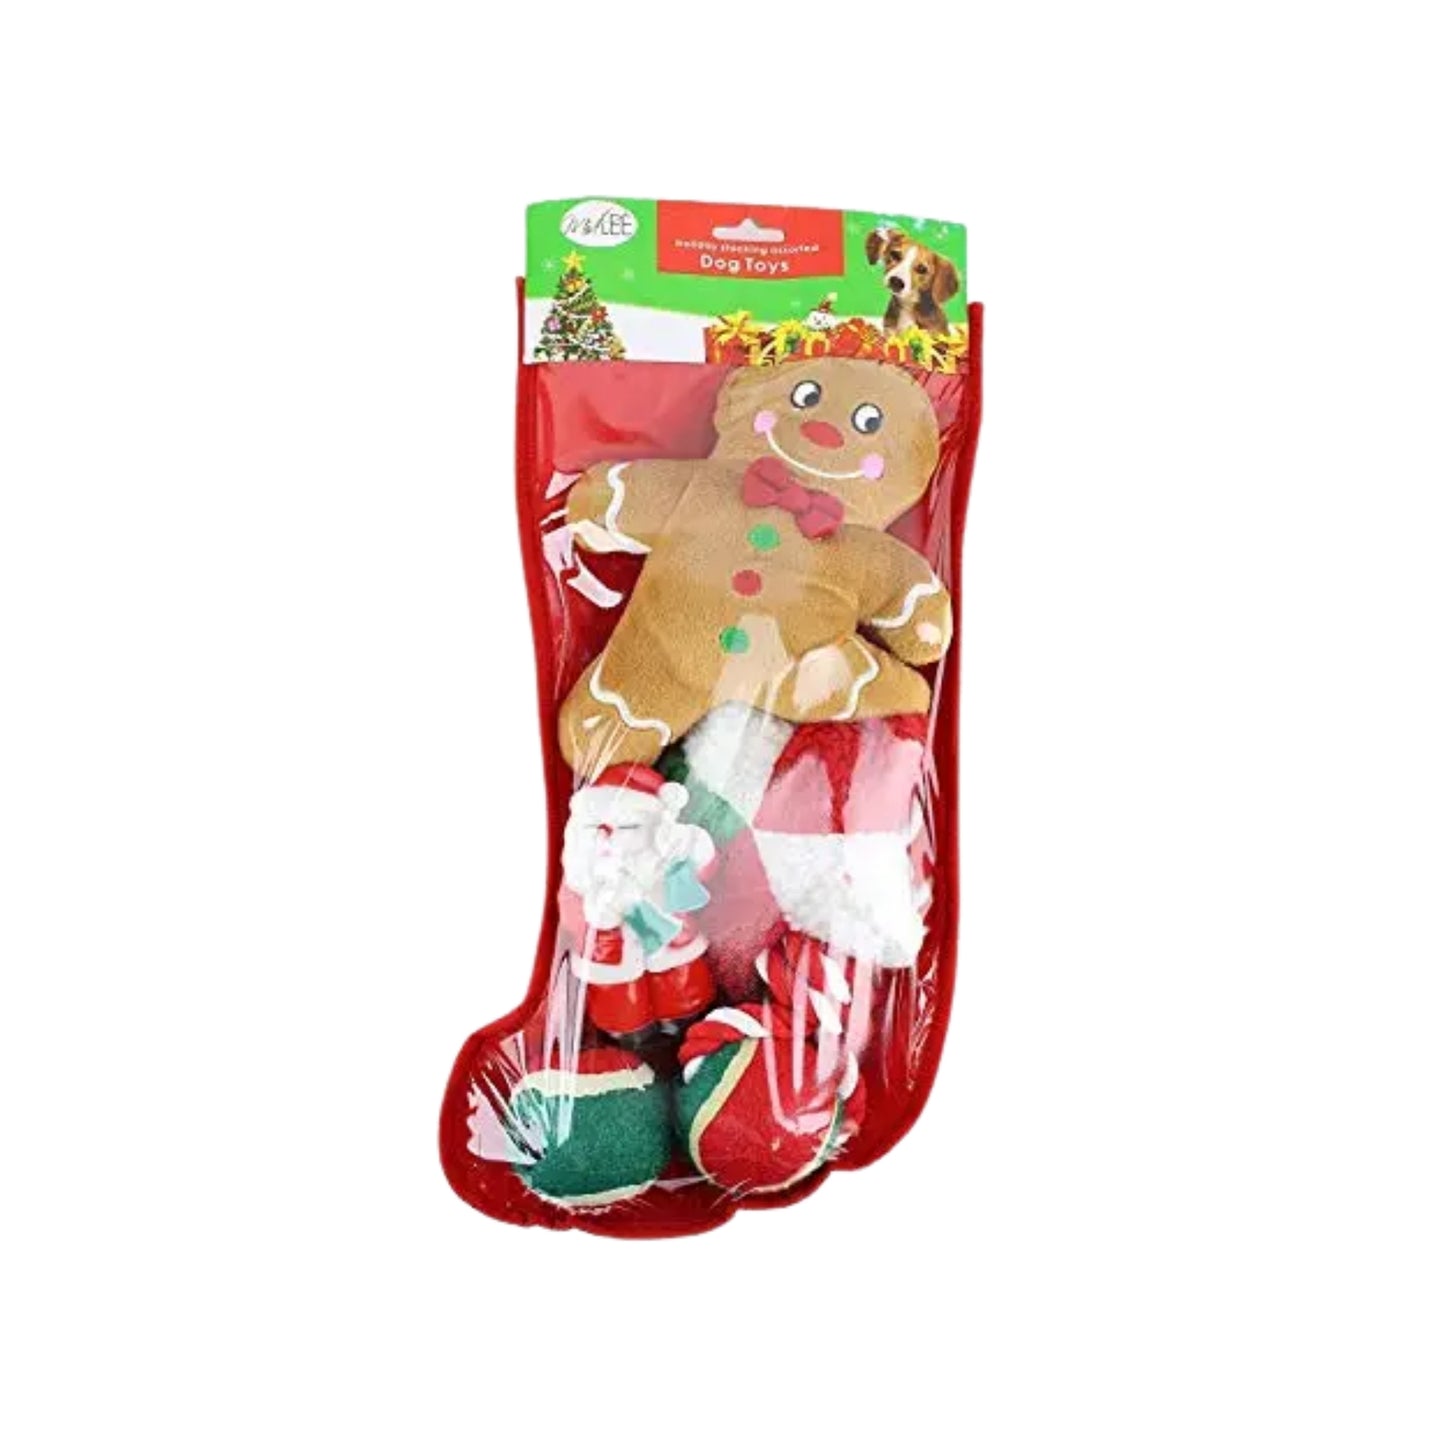 Midlee Toy Filled Christmas Dog Stocking Gift Set (14")- Squeaky Plush Ball Rope Holiday Pet Present